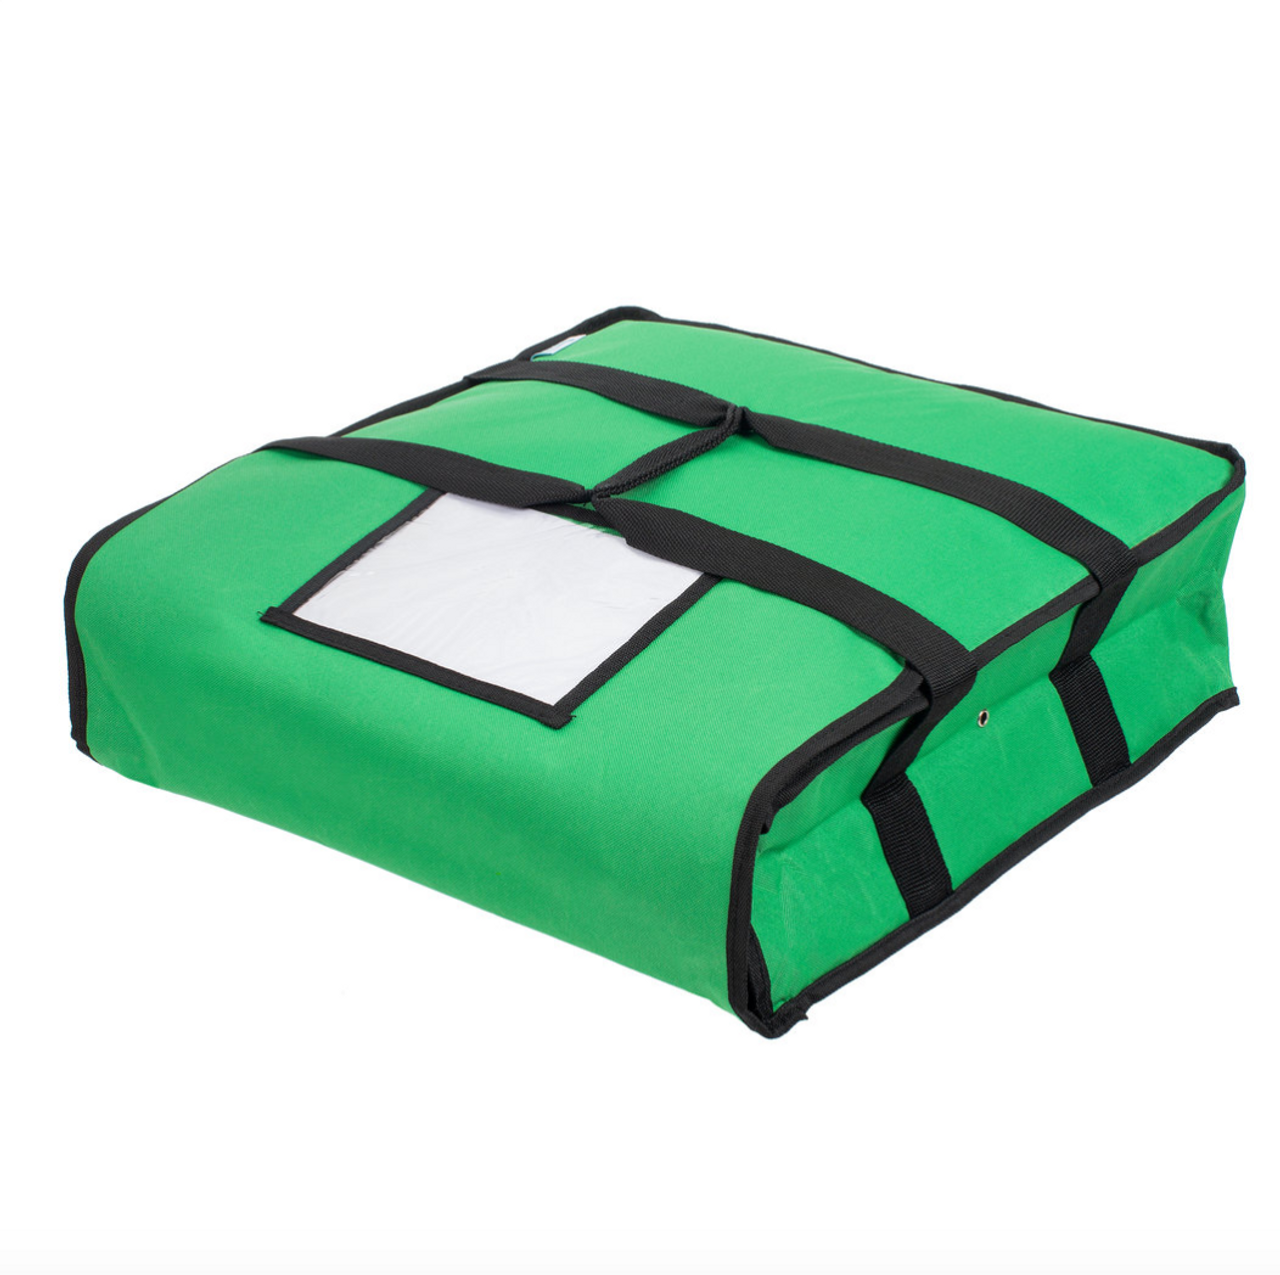 Pizza Delivery Bag, Green Nylon, 18" x 18" x 5" - Holds Up To (2) 16" Pizza Boxes or (1) 18" Pizza Box-Insulated 